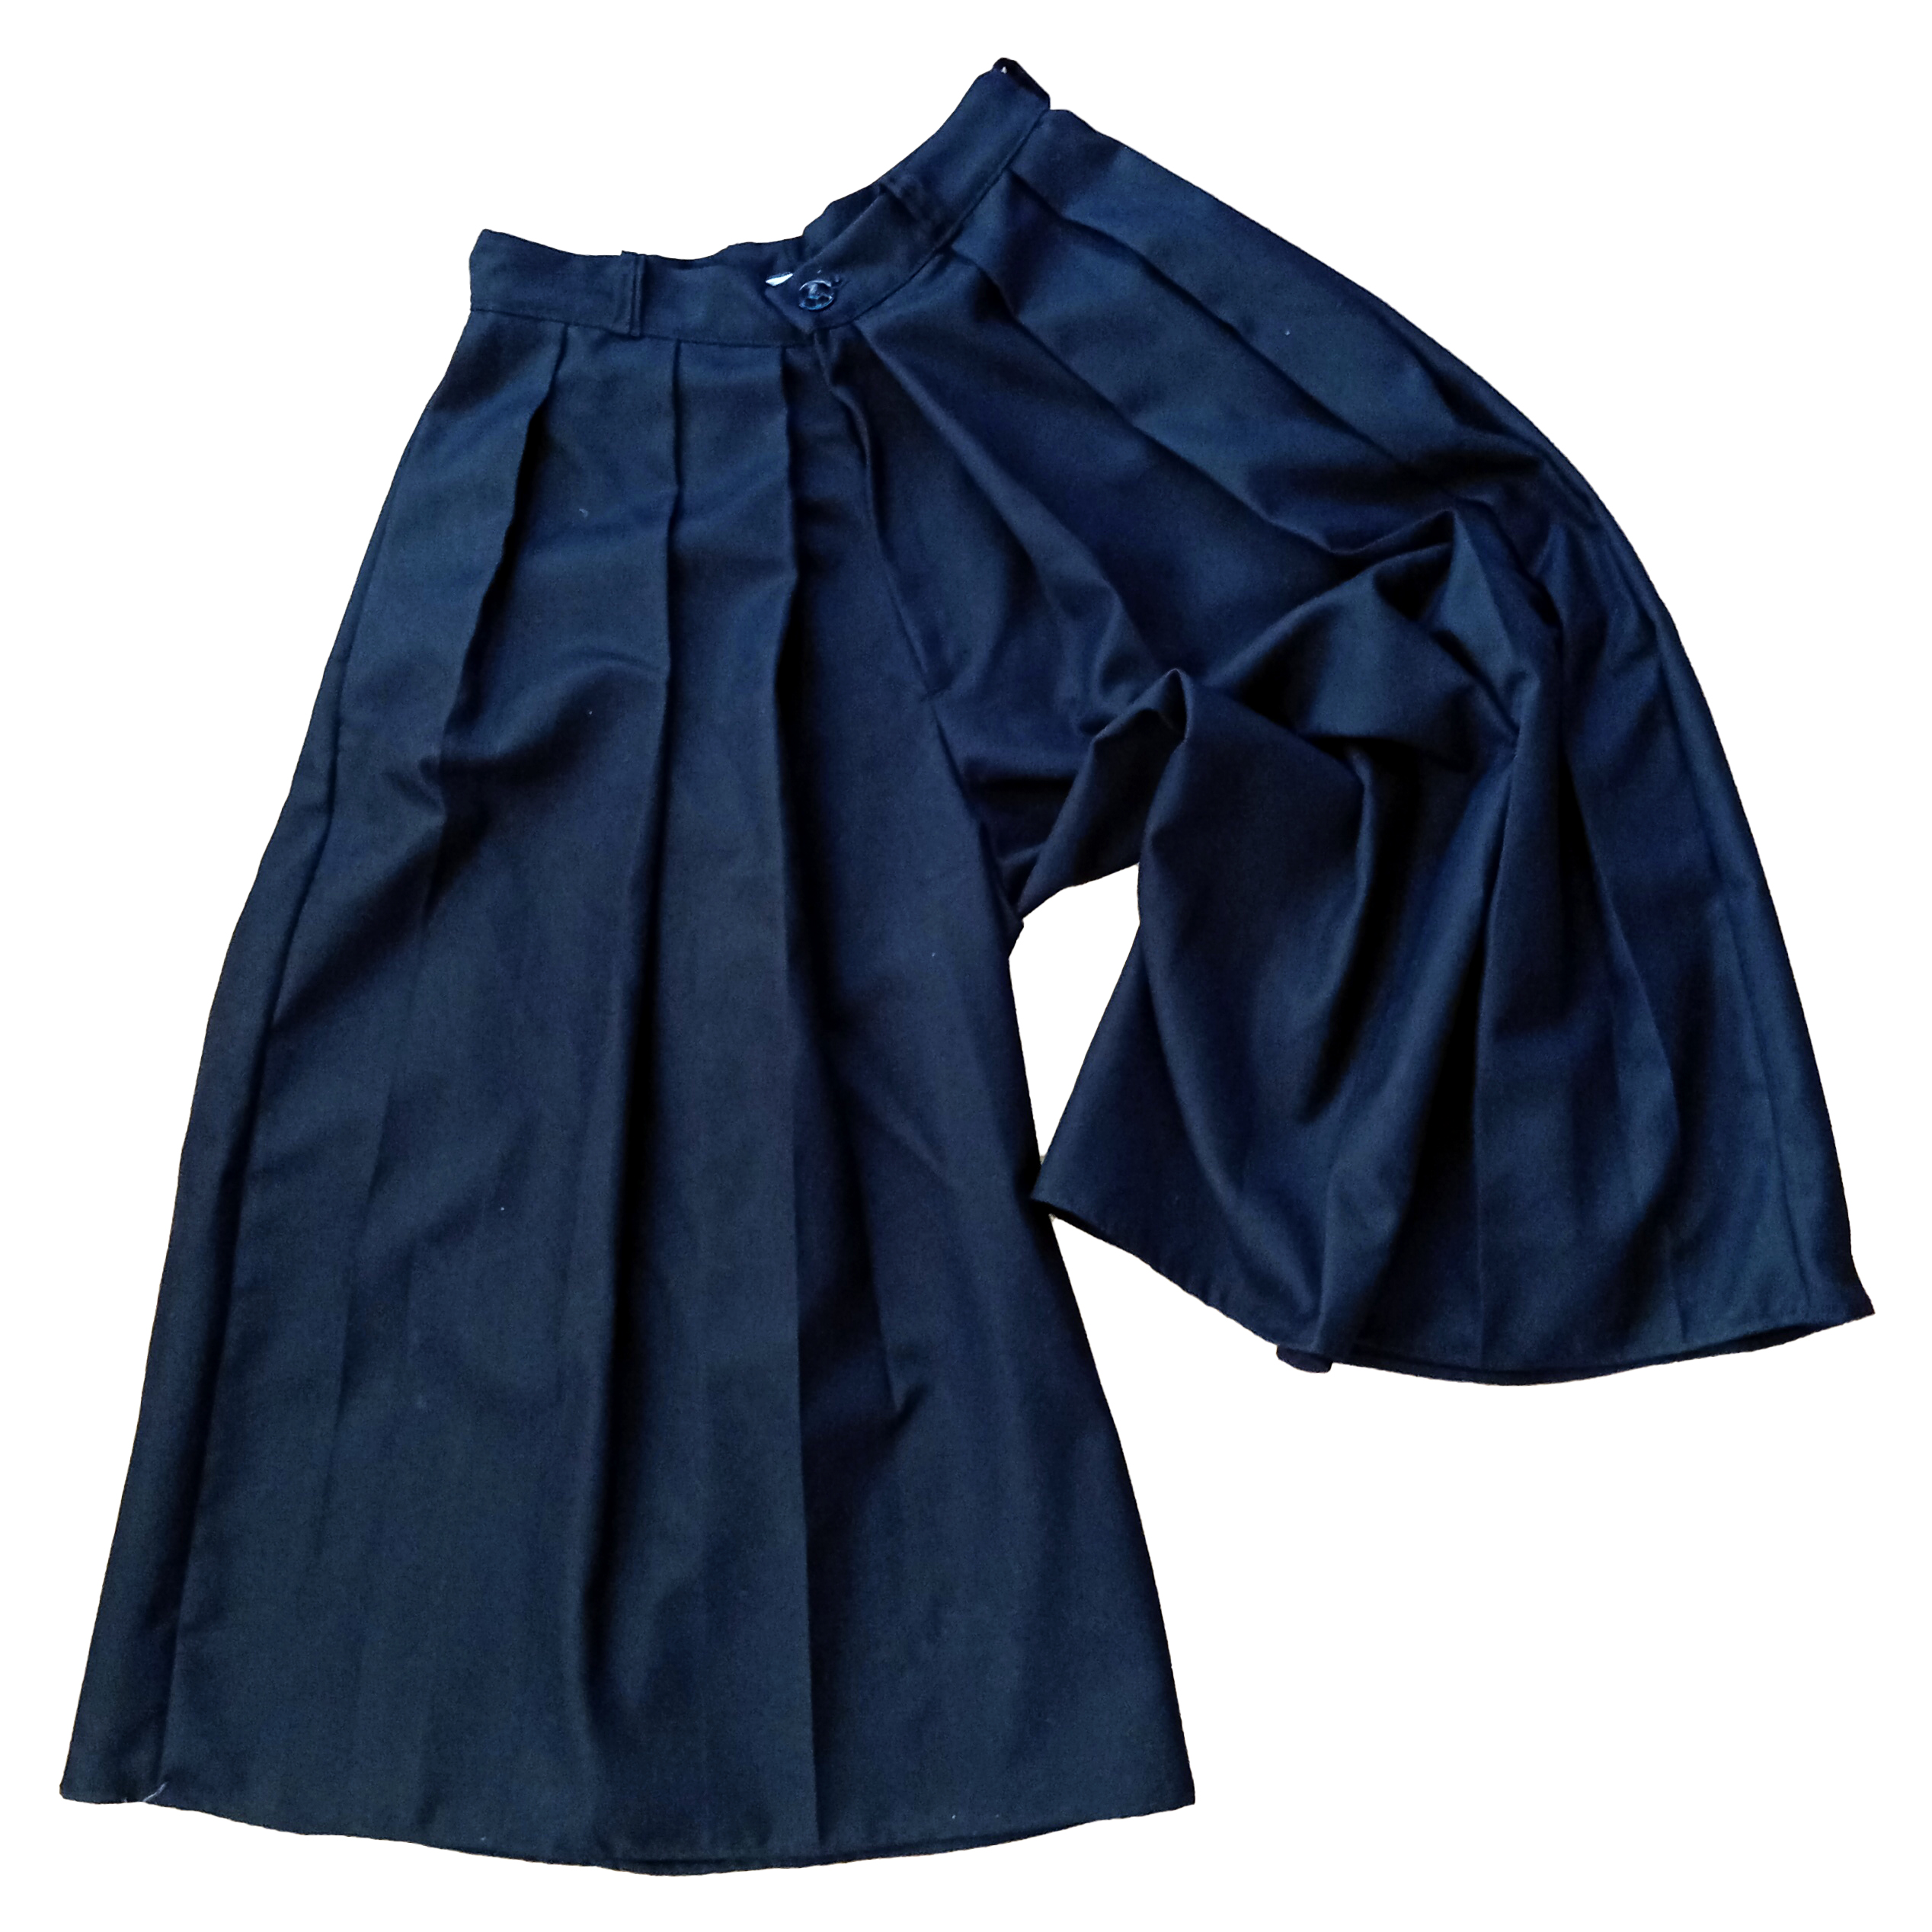 Hakama Takumi 8612 - For online shopping of Japanese culture items, go to  Taiko Center Online Shop